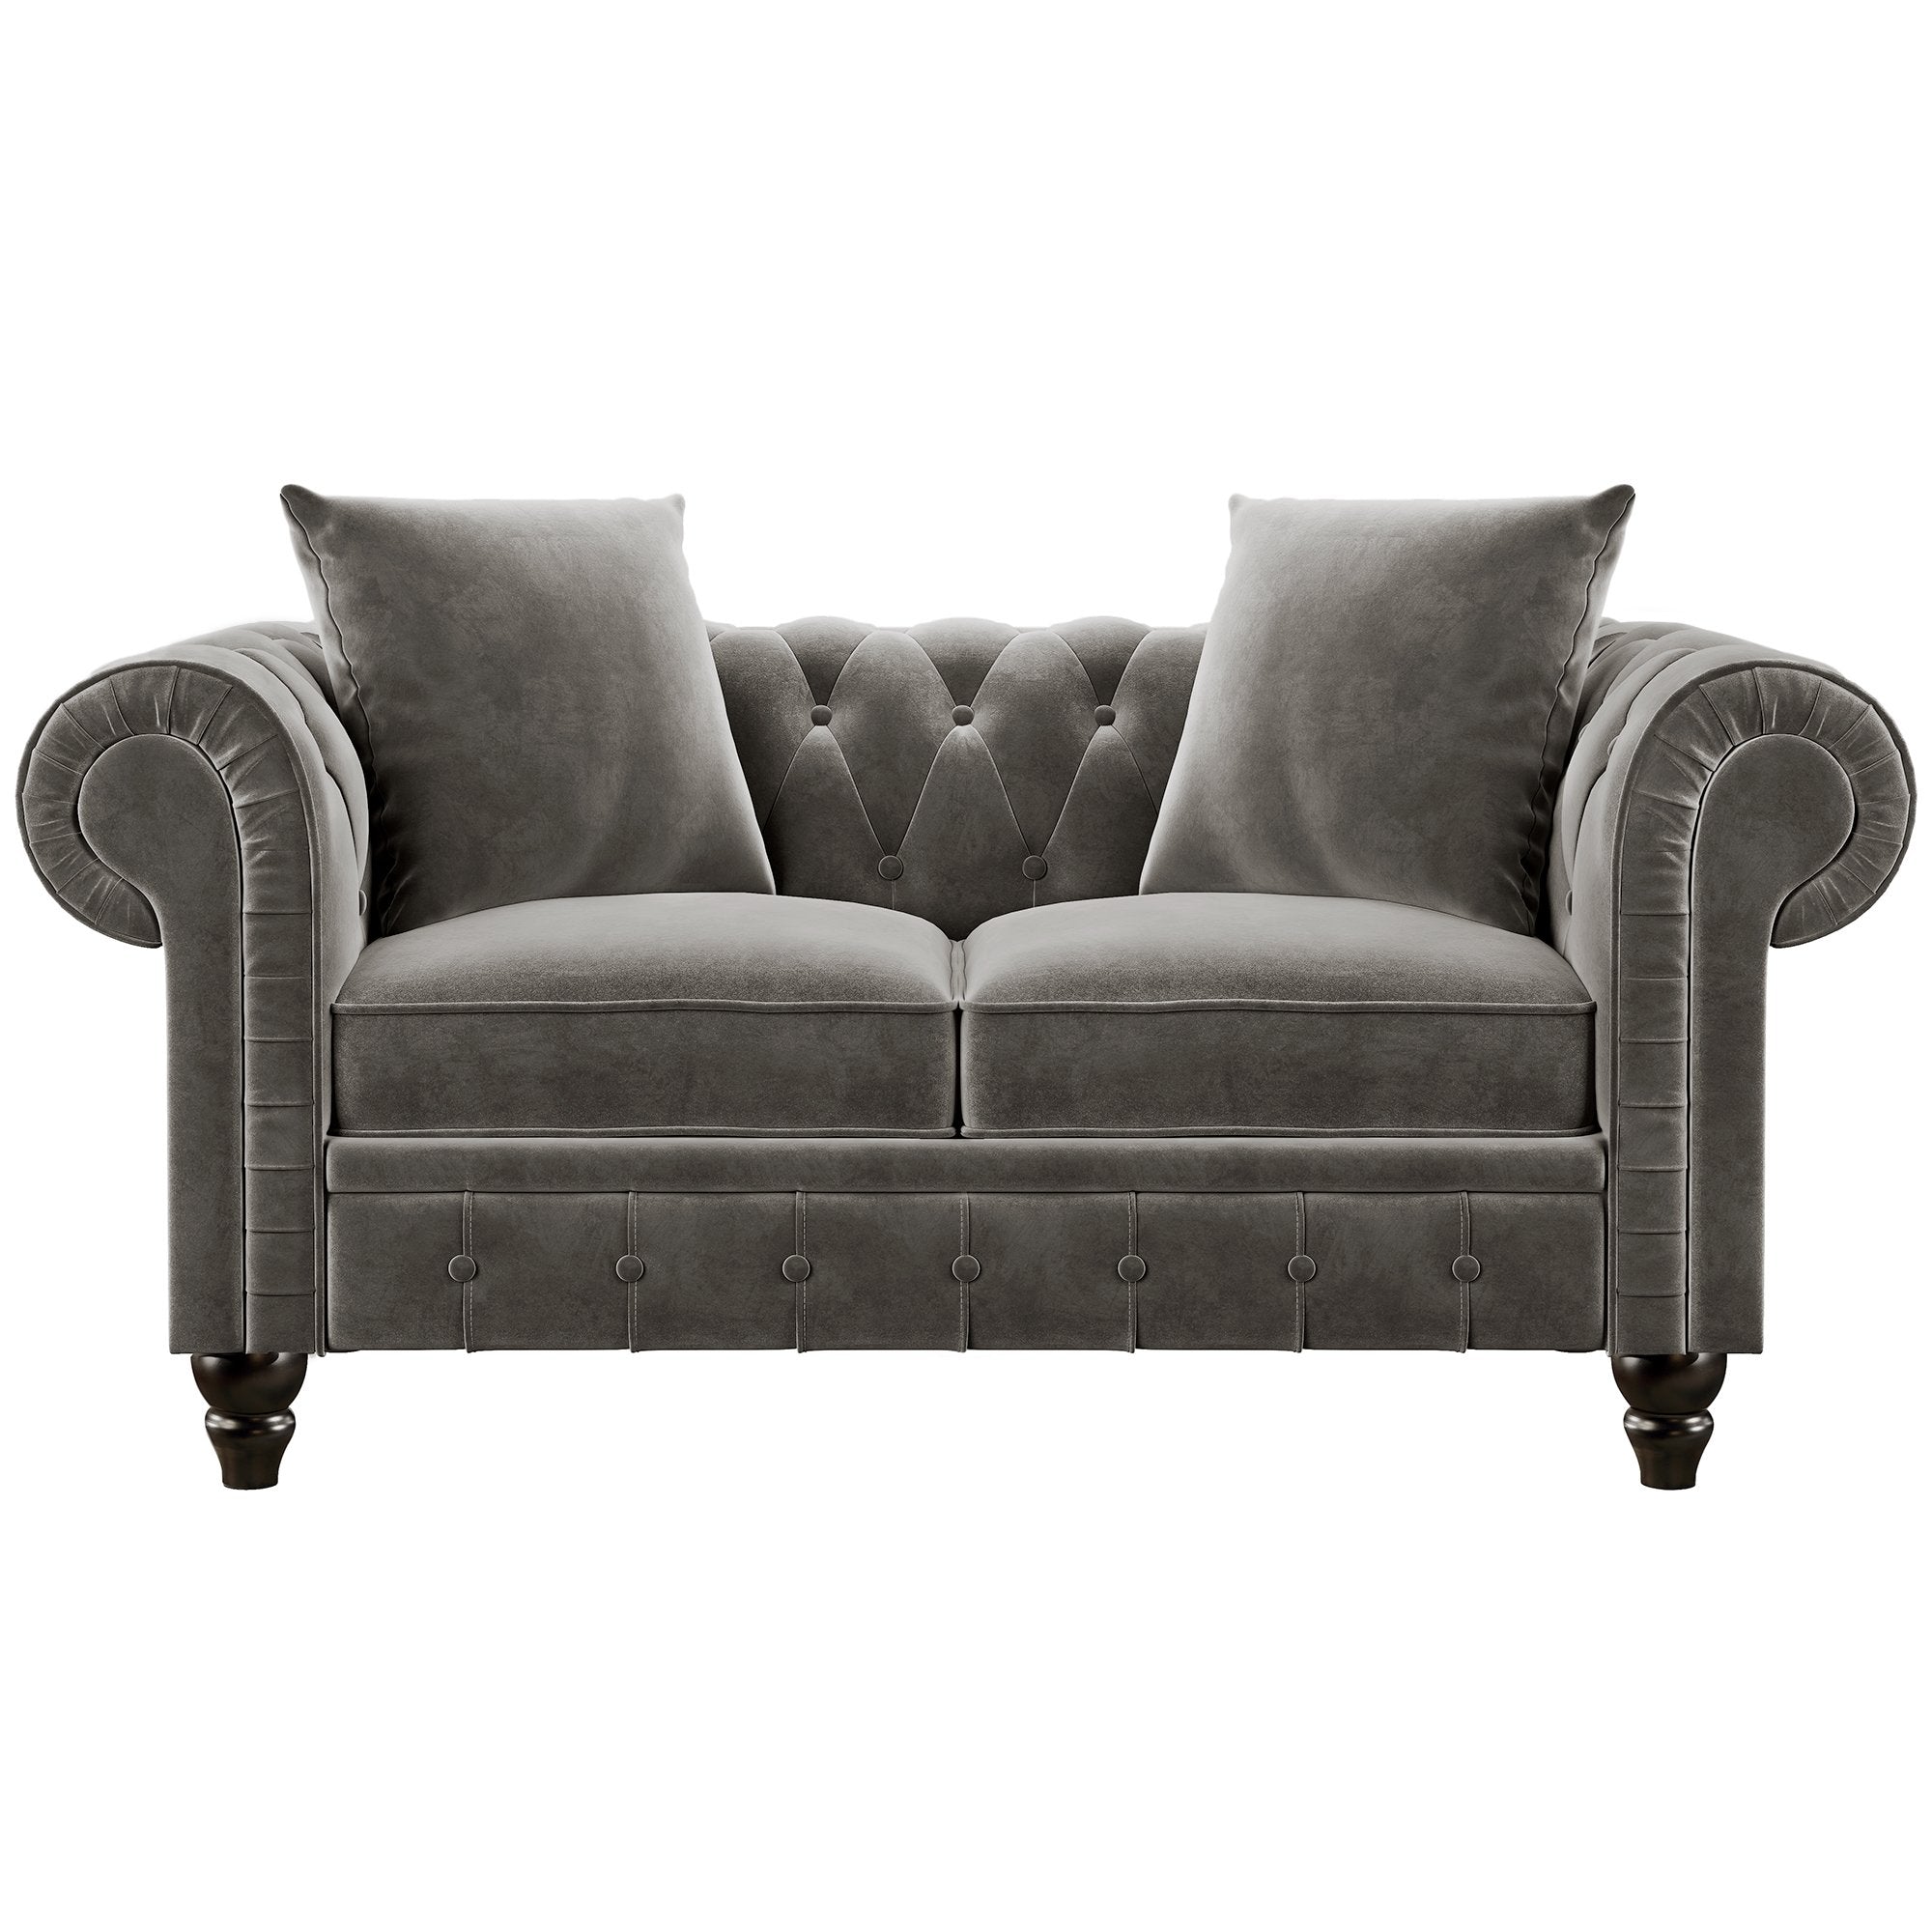 63" Deep Button Tufted Velvet Loveseat Sofa Roll Arm Classic Chesterfield Settee,2 Pillows included-Boyel Living